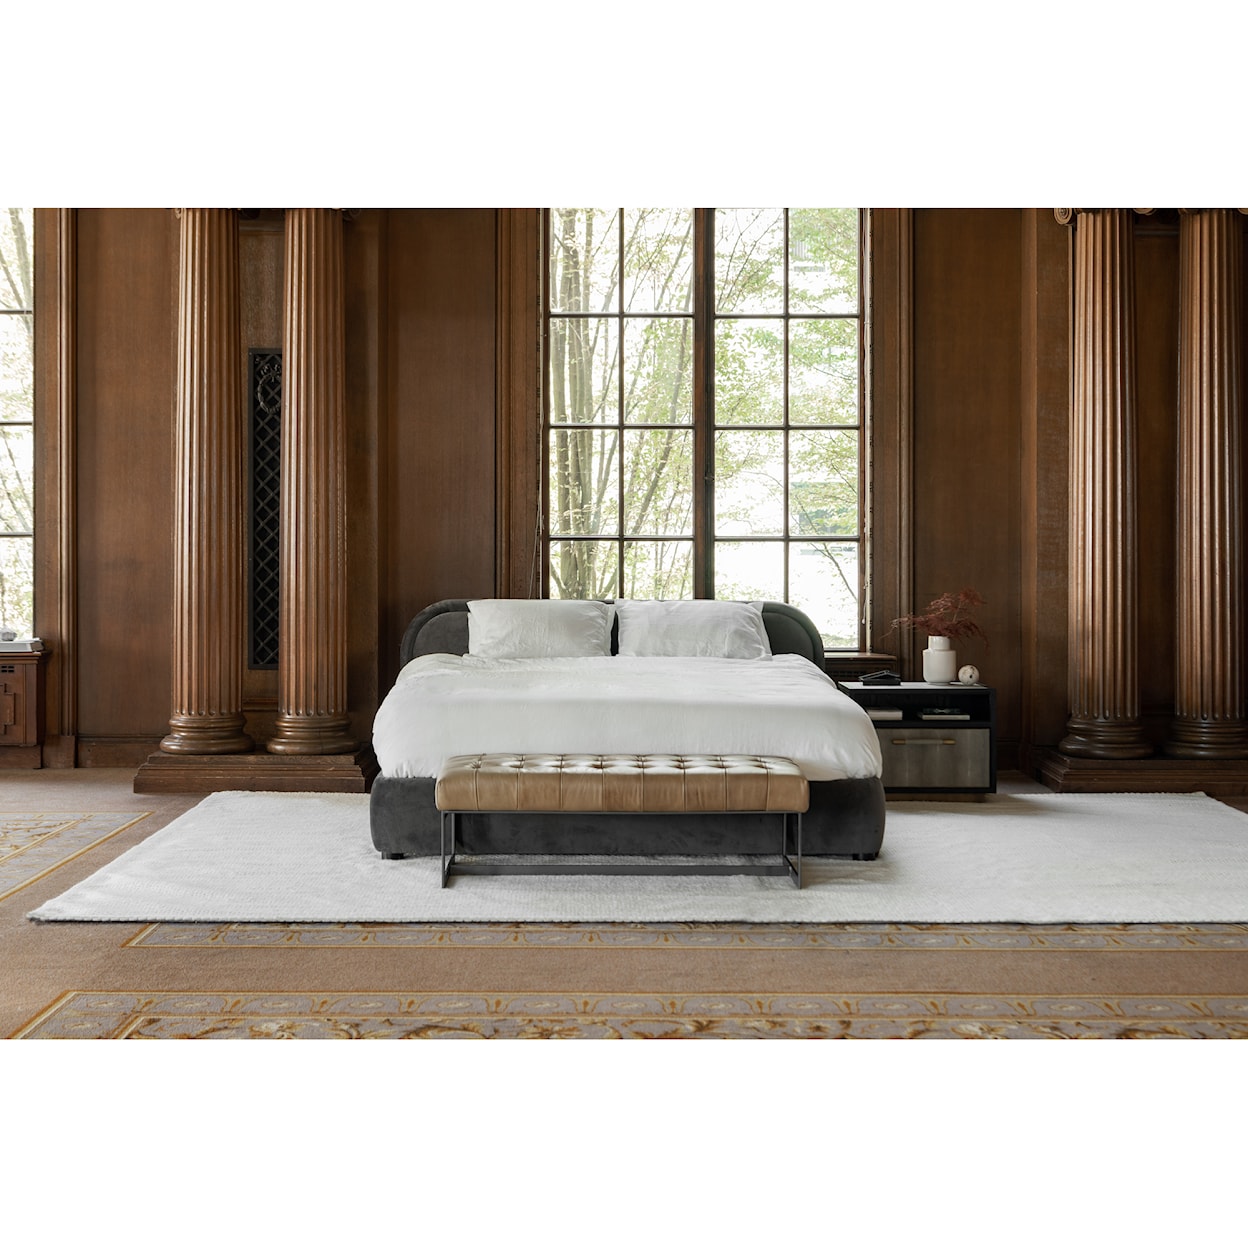 Moe's Home Collection Colin Colin Queen Bed Charcoal